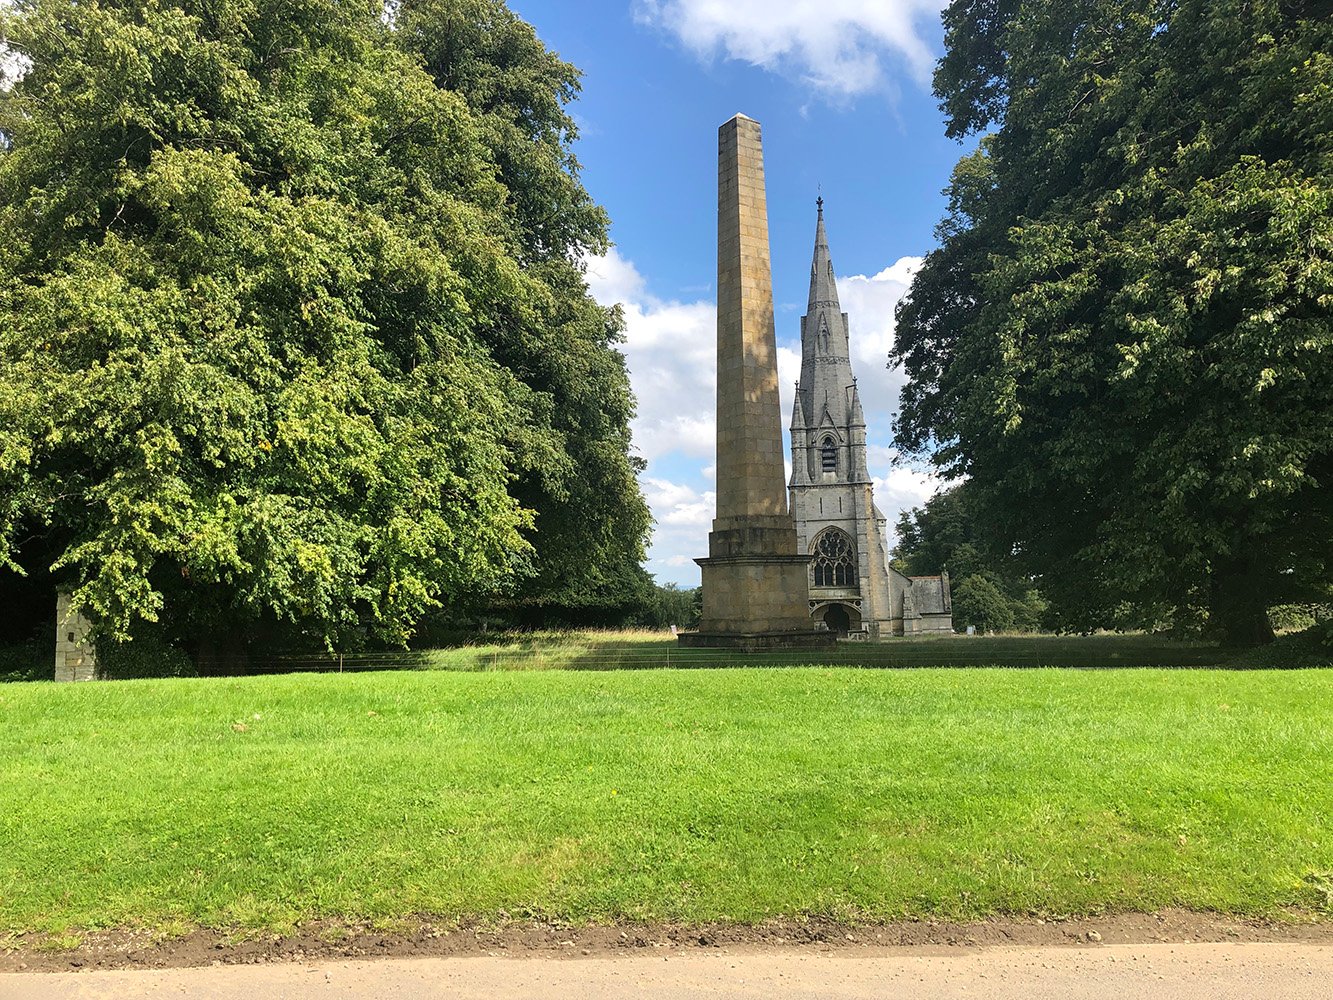 Image name obelisk and church studley royal fountains abbey north yorkshire the 13 image from the post A look at the history of Studley Royal, North Yorkshire, with Dr Emma Wells in Yorkshire.com.